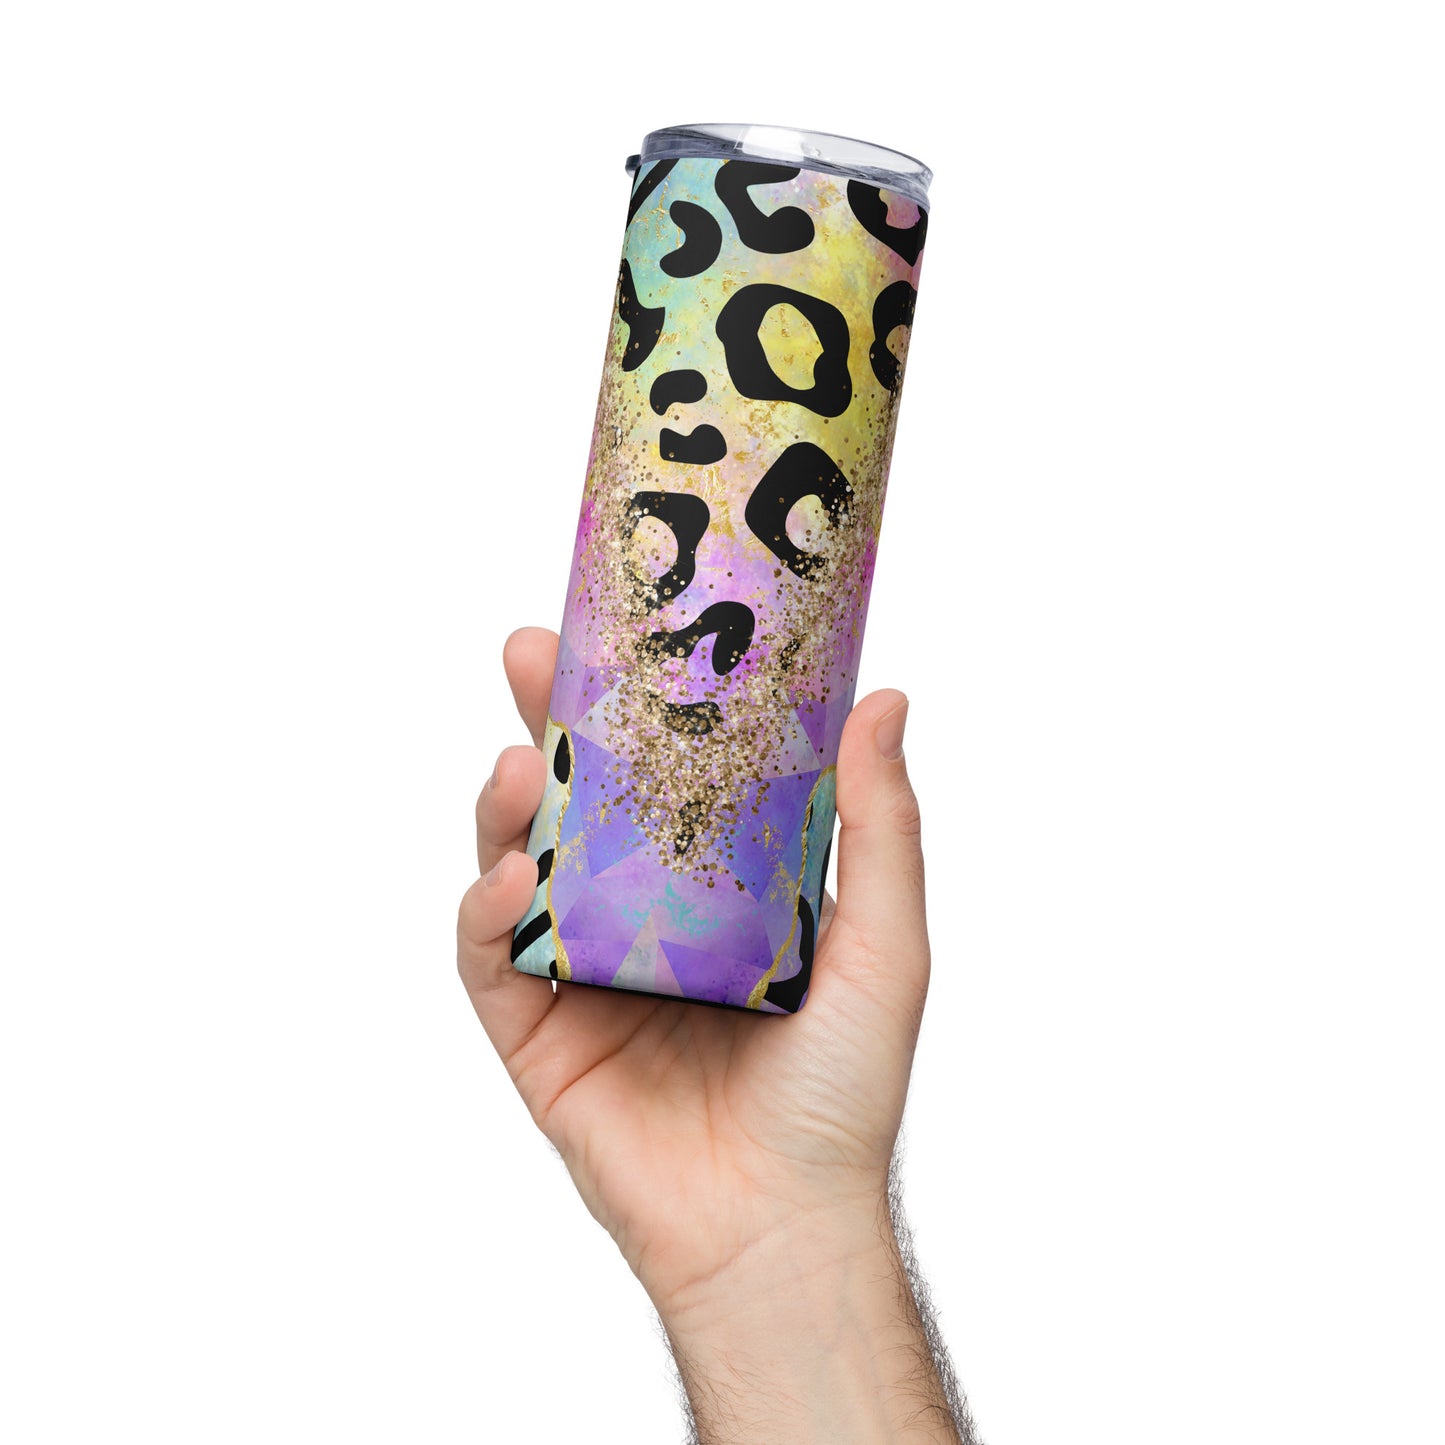 Leopard and Glitter Stainless Steel Tumbler